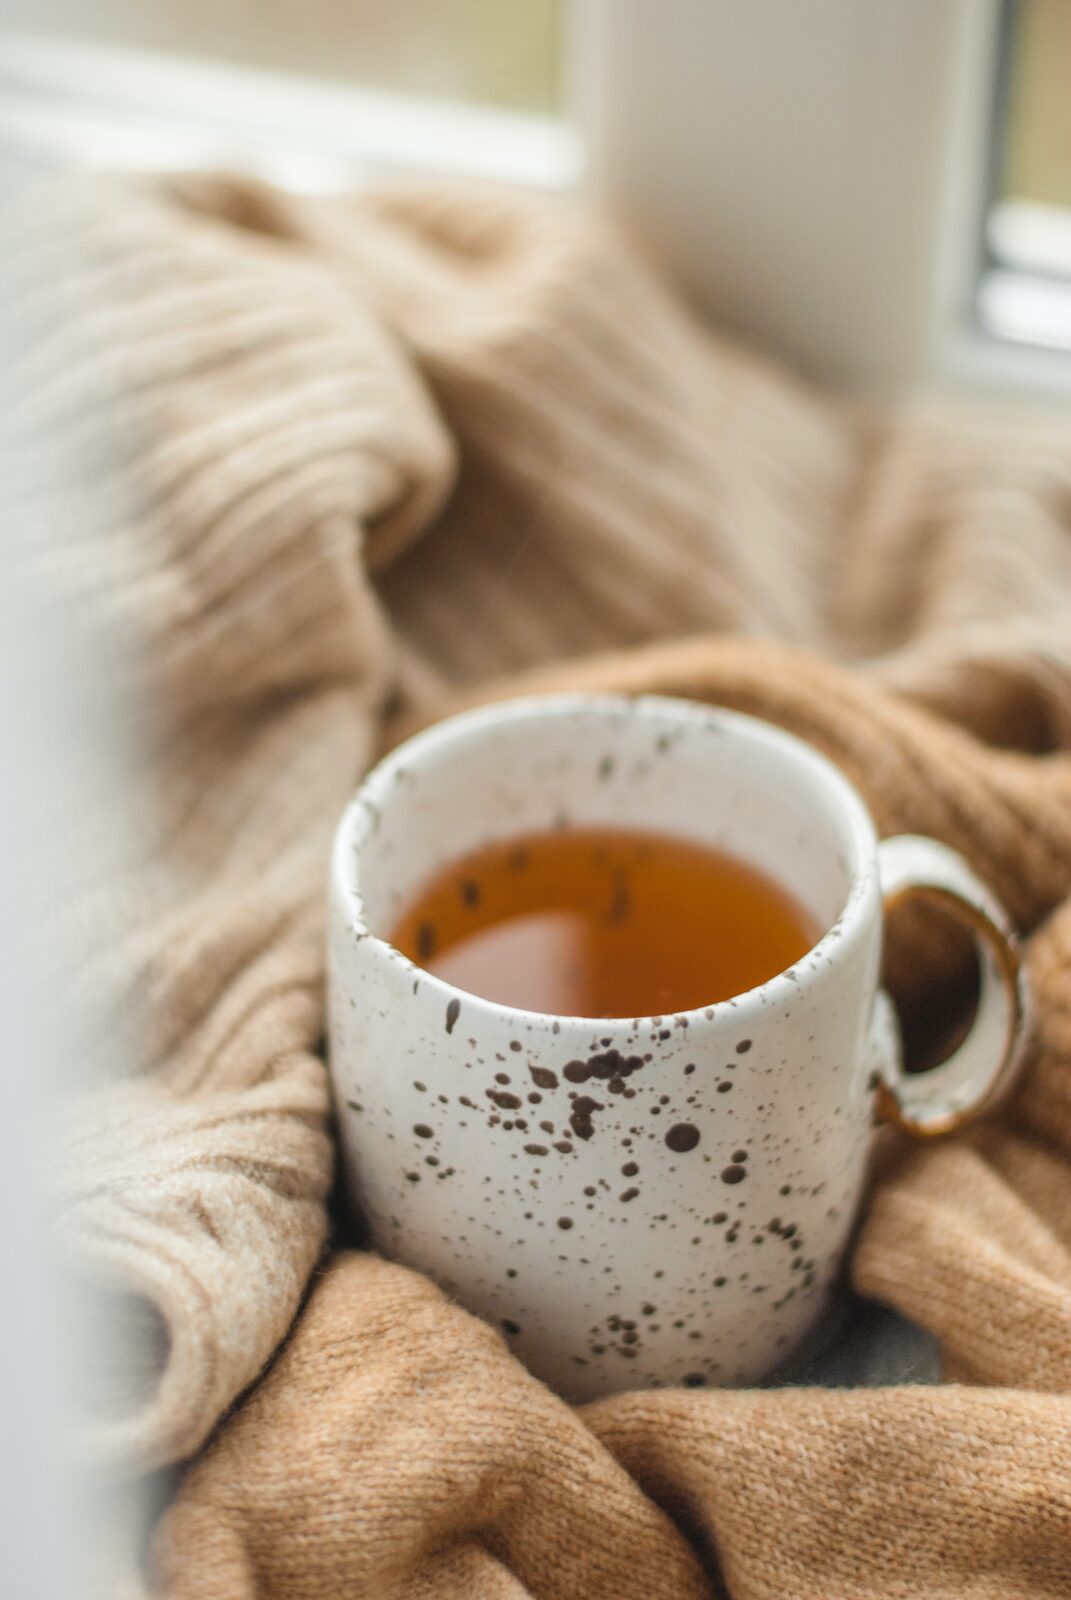 Dandelion root tea is an effective natural way to detoxify the liver and kidneys. It may also help relieve symptoms of joint pain, bloating, gas, and other problems. Learn how to make dandelion root tea here.